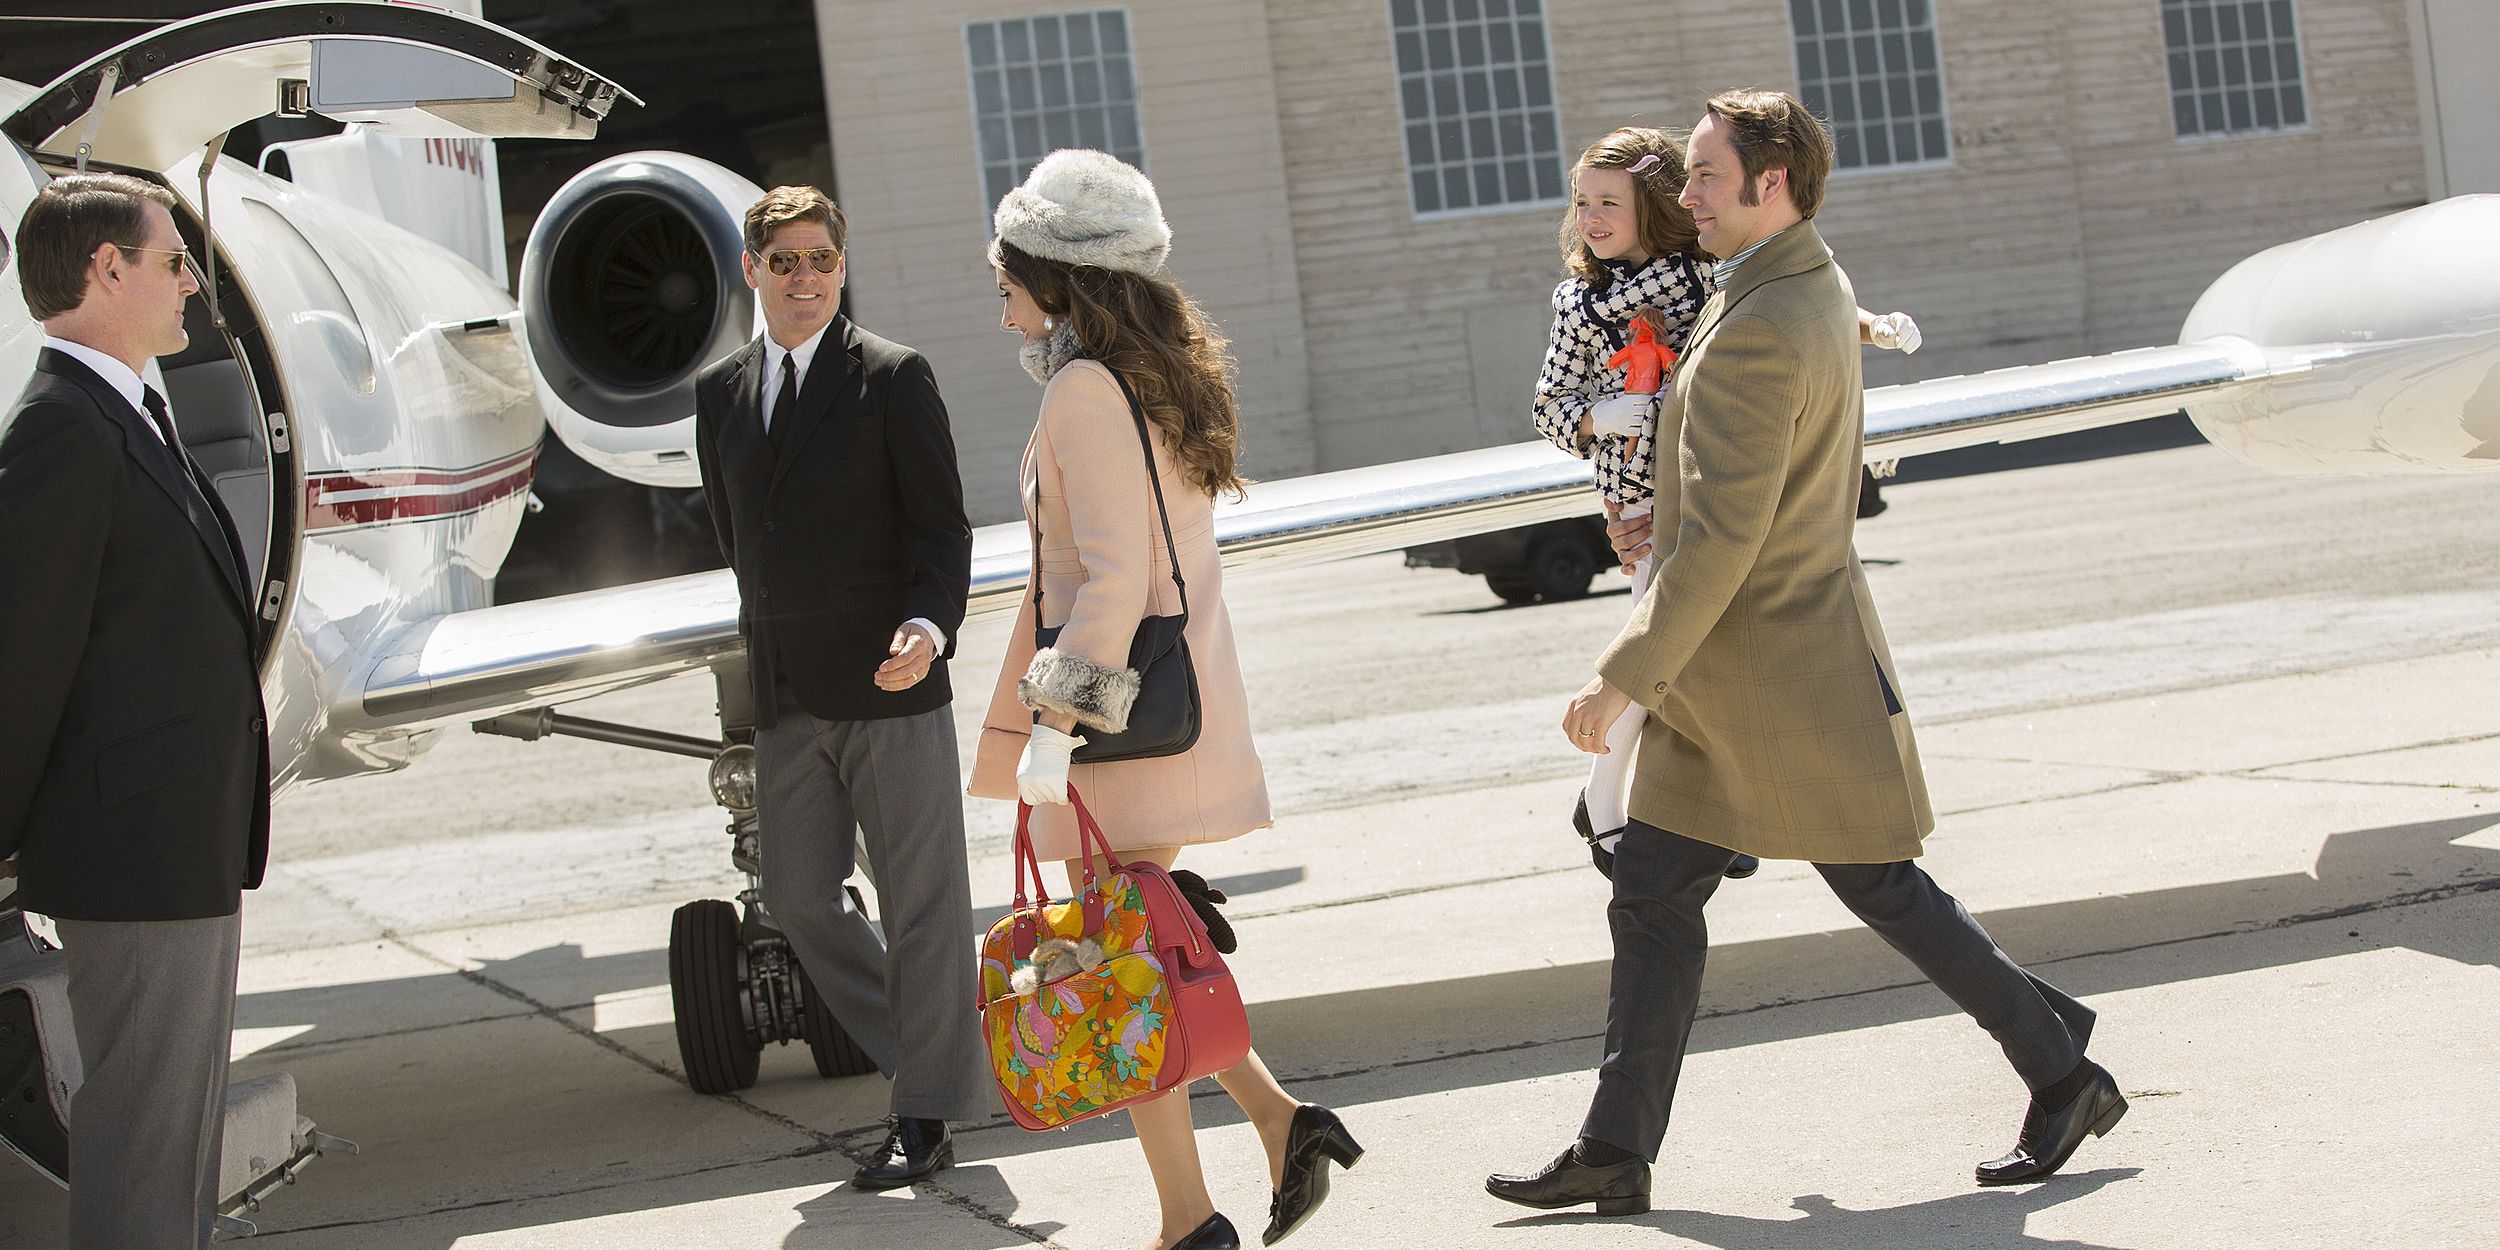 Pete and Trudy Campbell moving to Wichita in season 7 Mad Men